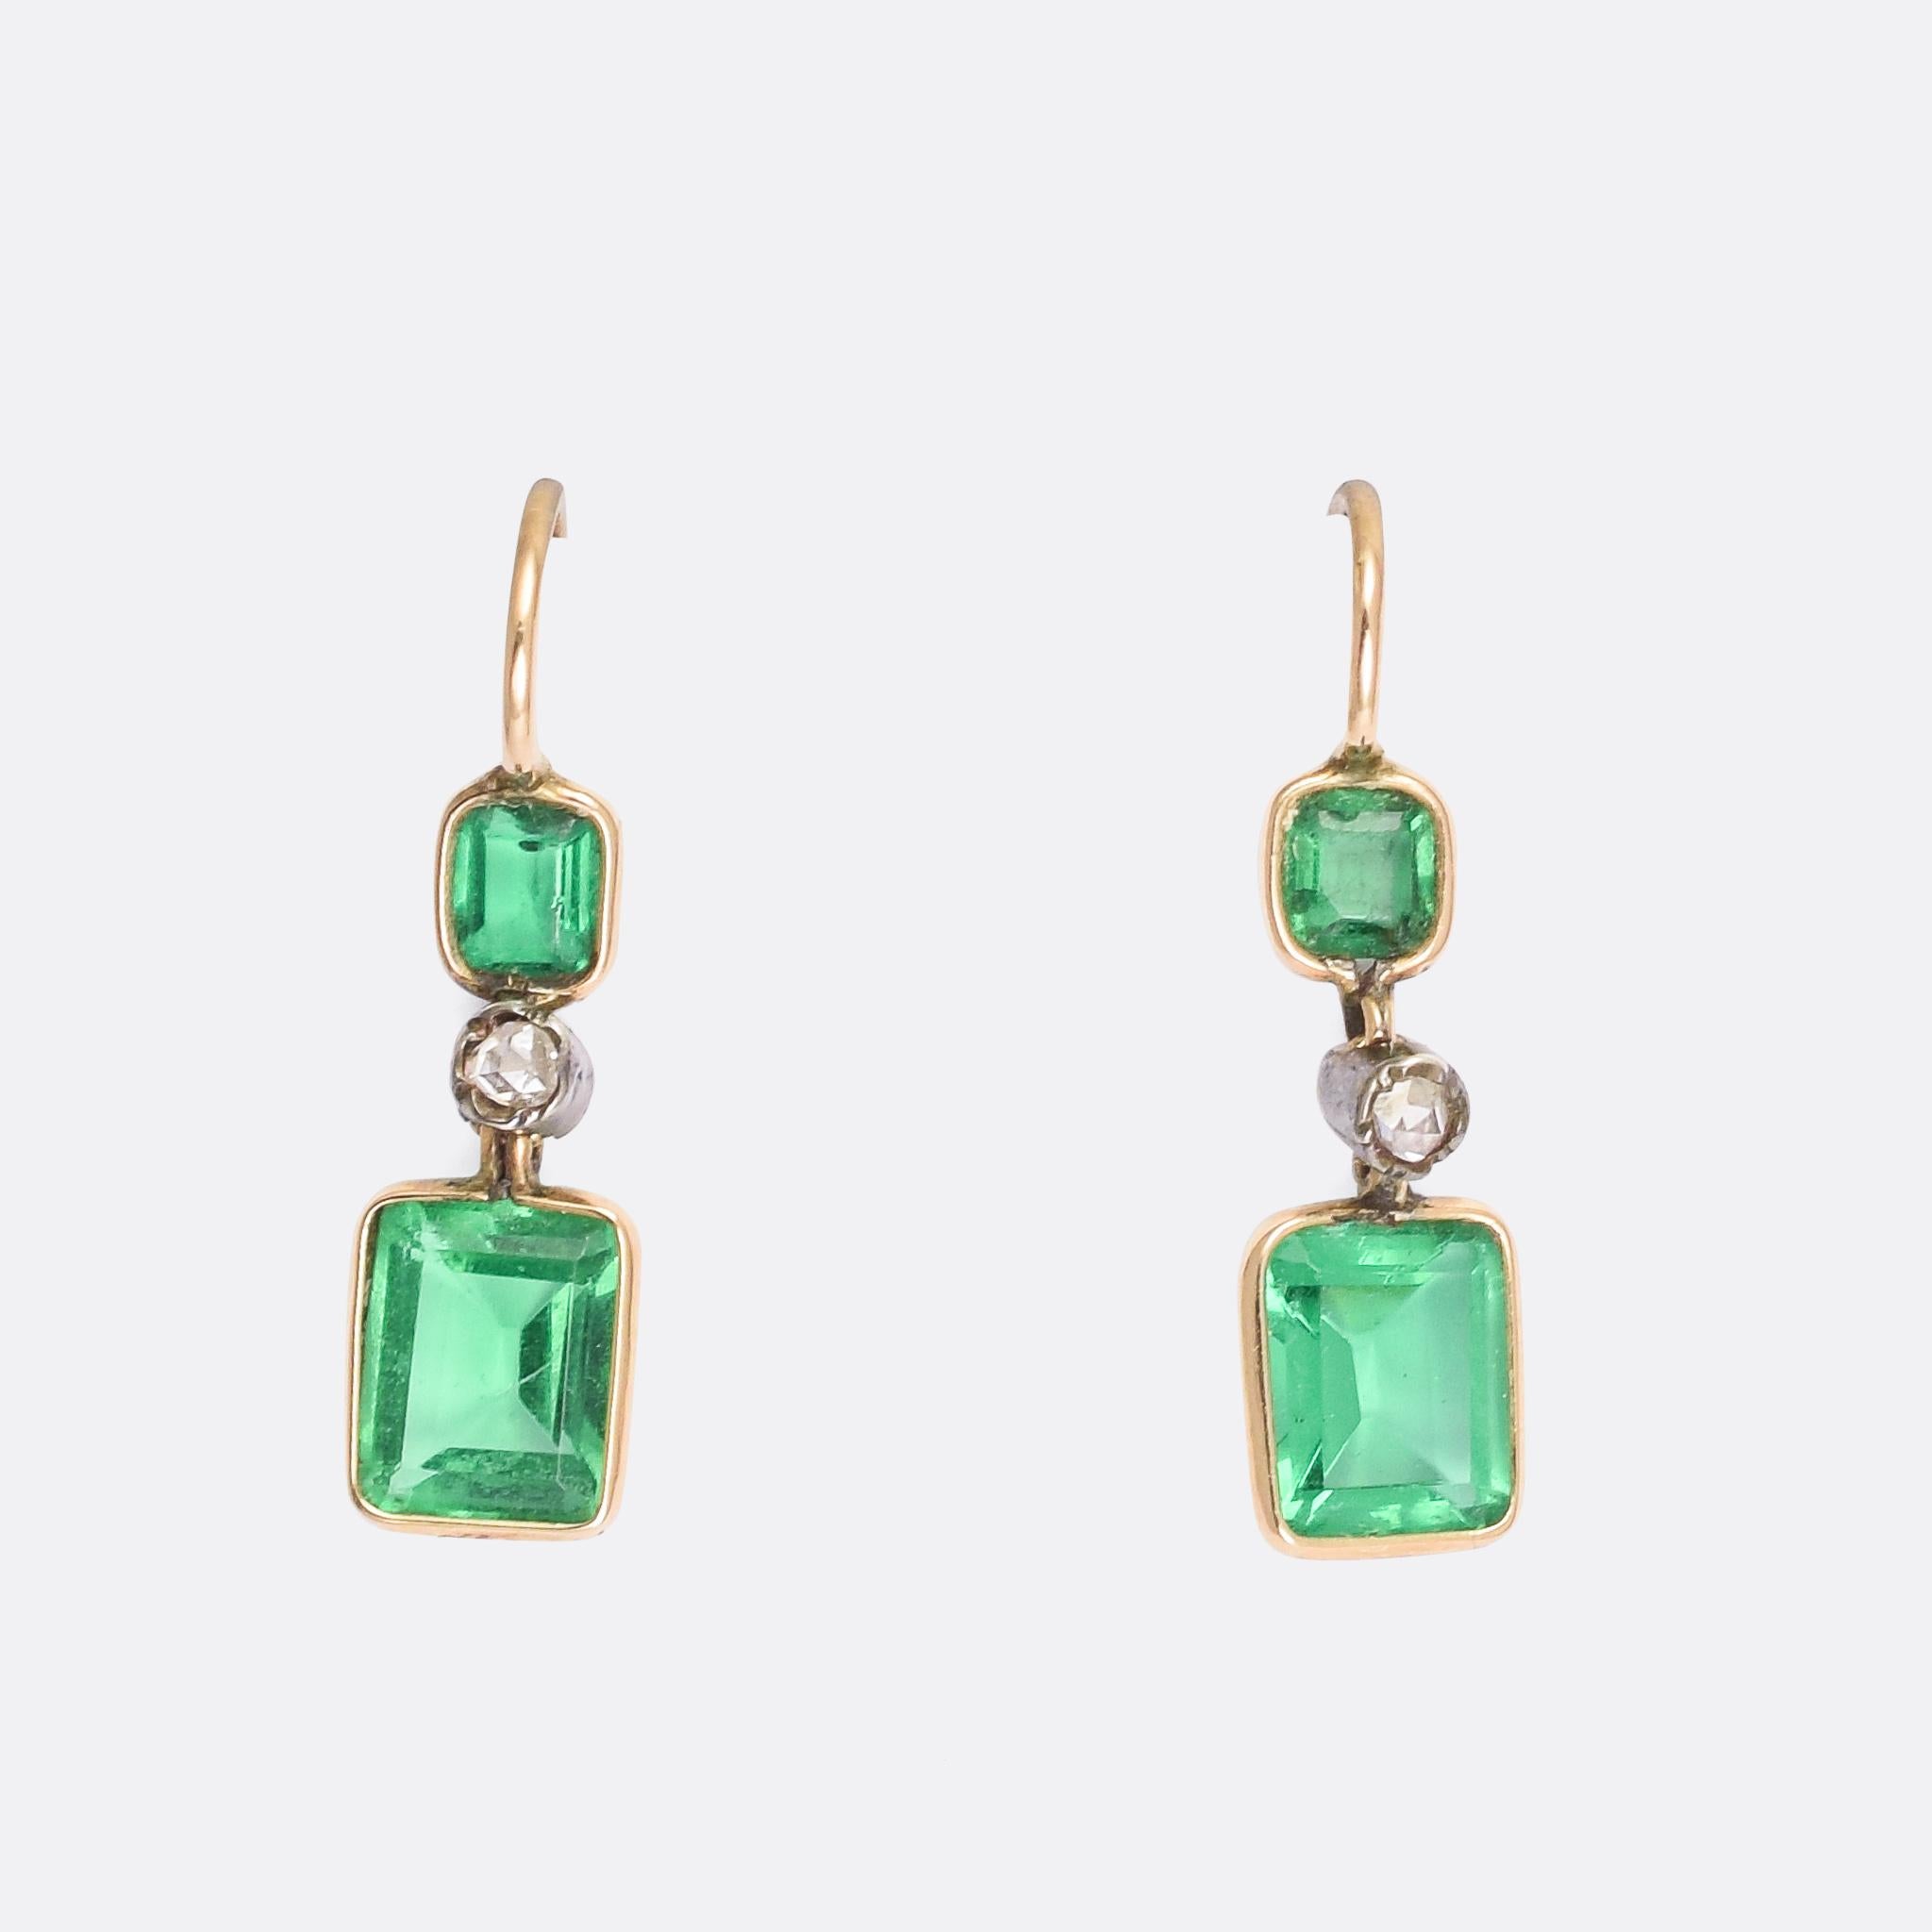 A gorgeous pair of antique emerald paste and rose cut diamond earrings dating from the late Victorian era, circa 1900. The stones rest in simple collet settings; 15 karat gold for the pastes, and sterling silver for the diamonds. They're elegant but